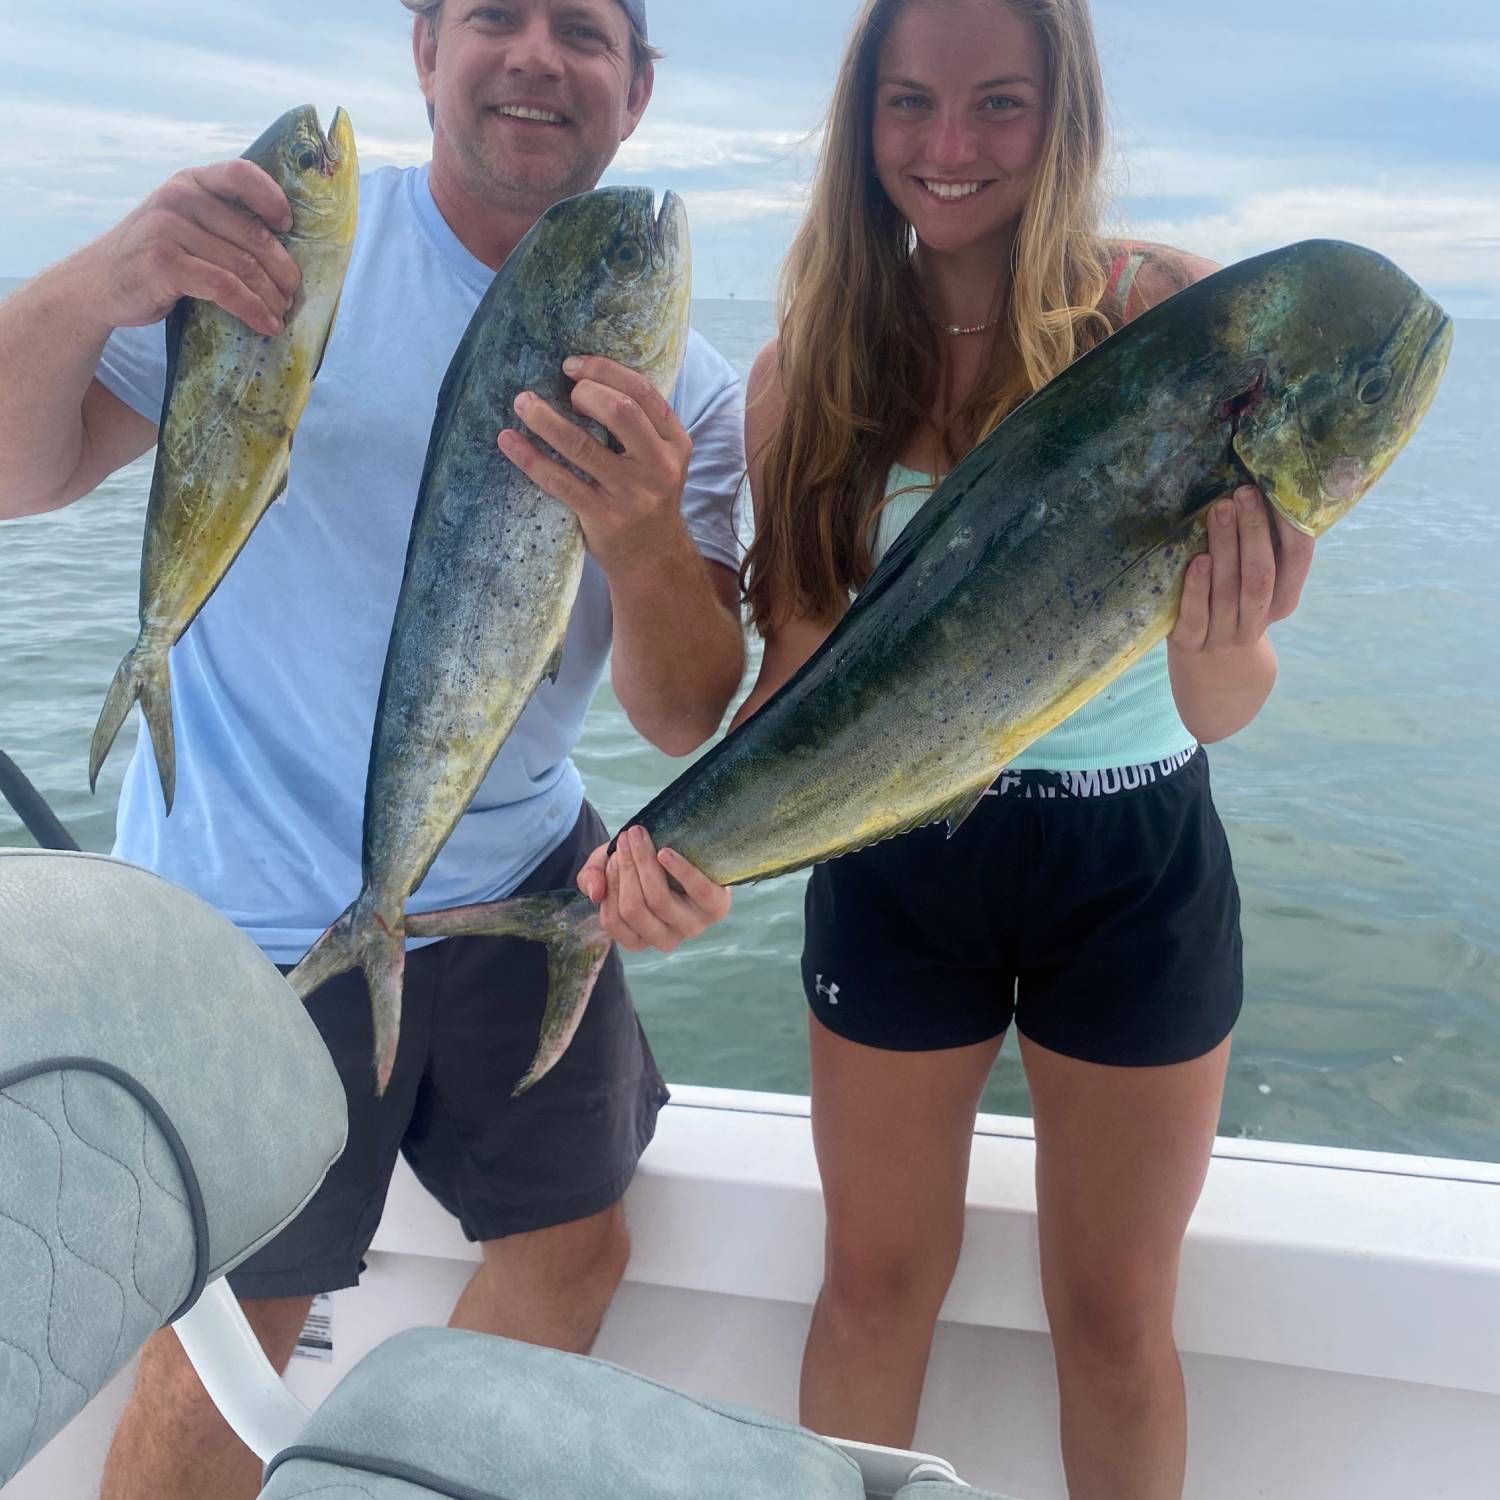 This is a birthday fishing trip with my daughters. My birthday is June 4th which usually coincides with the opening...